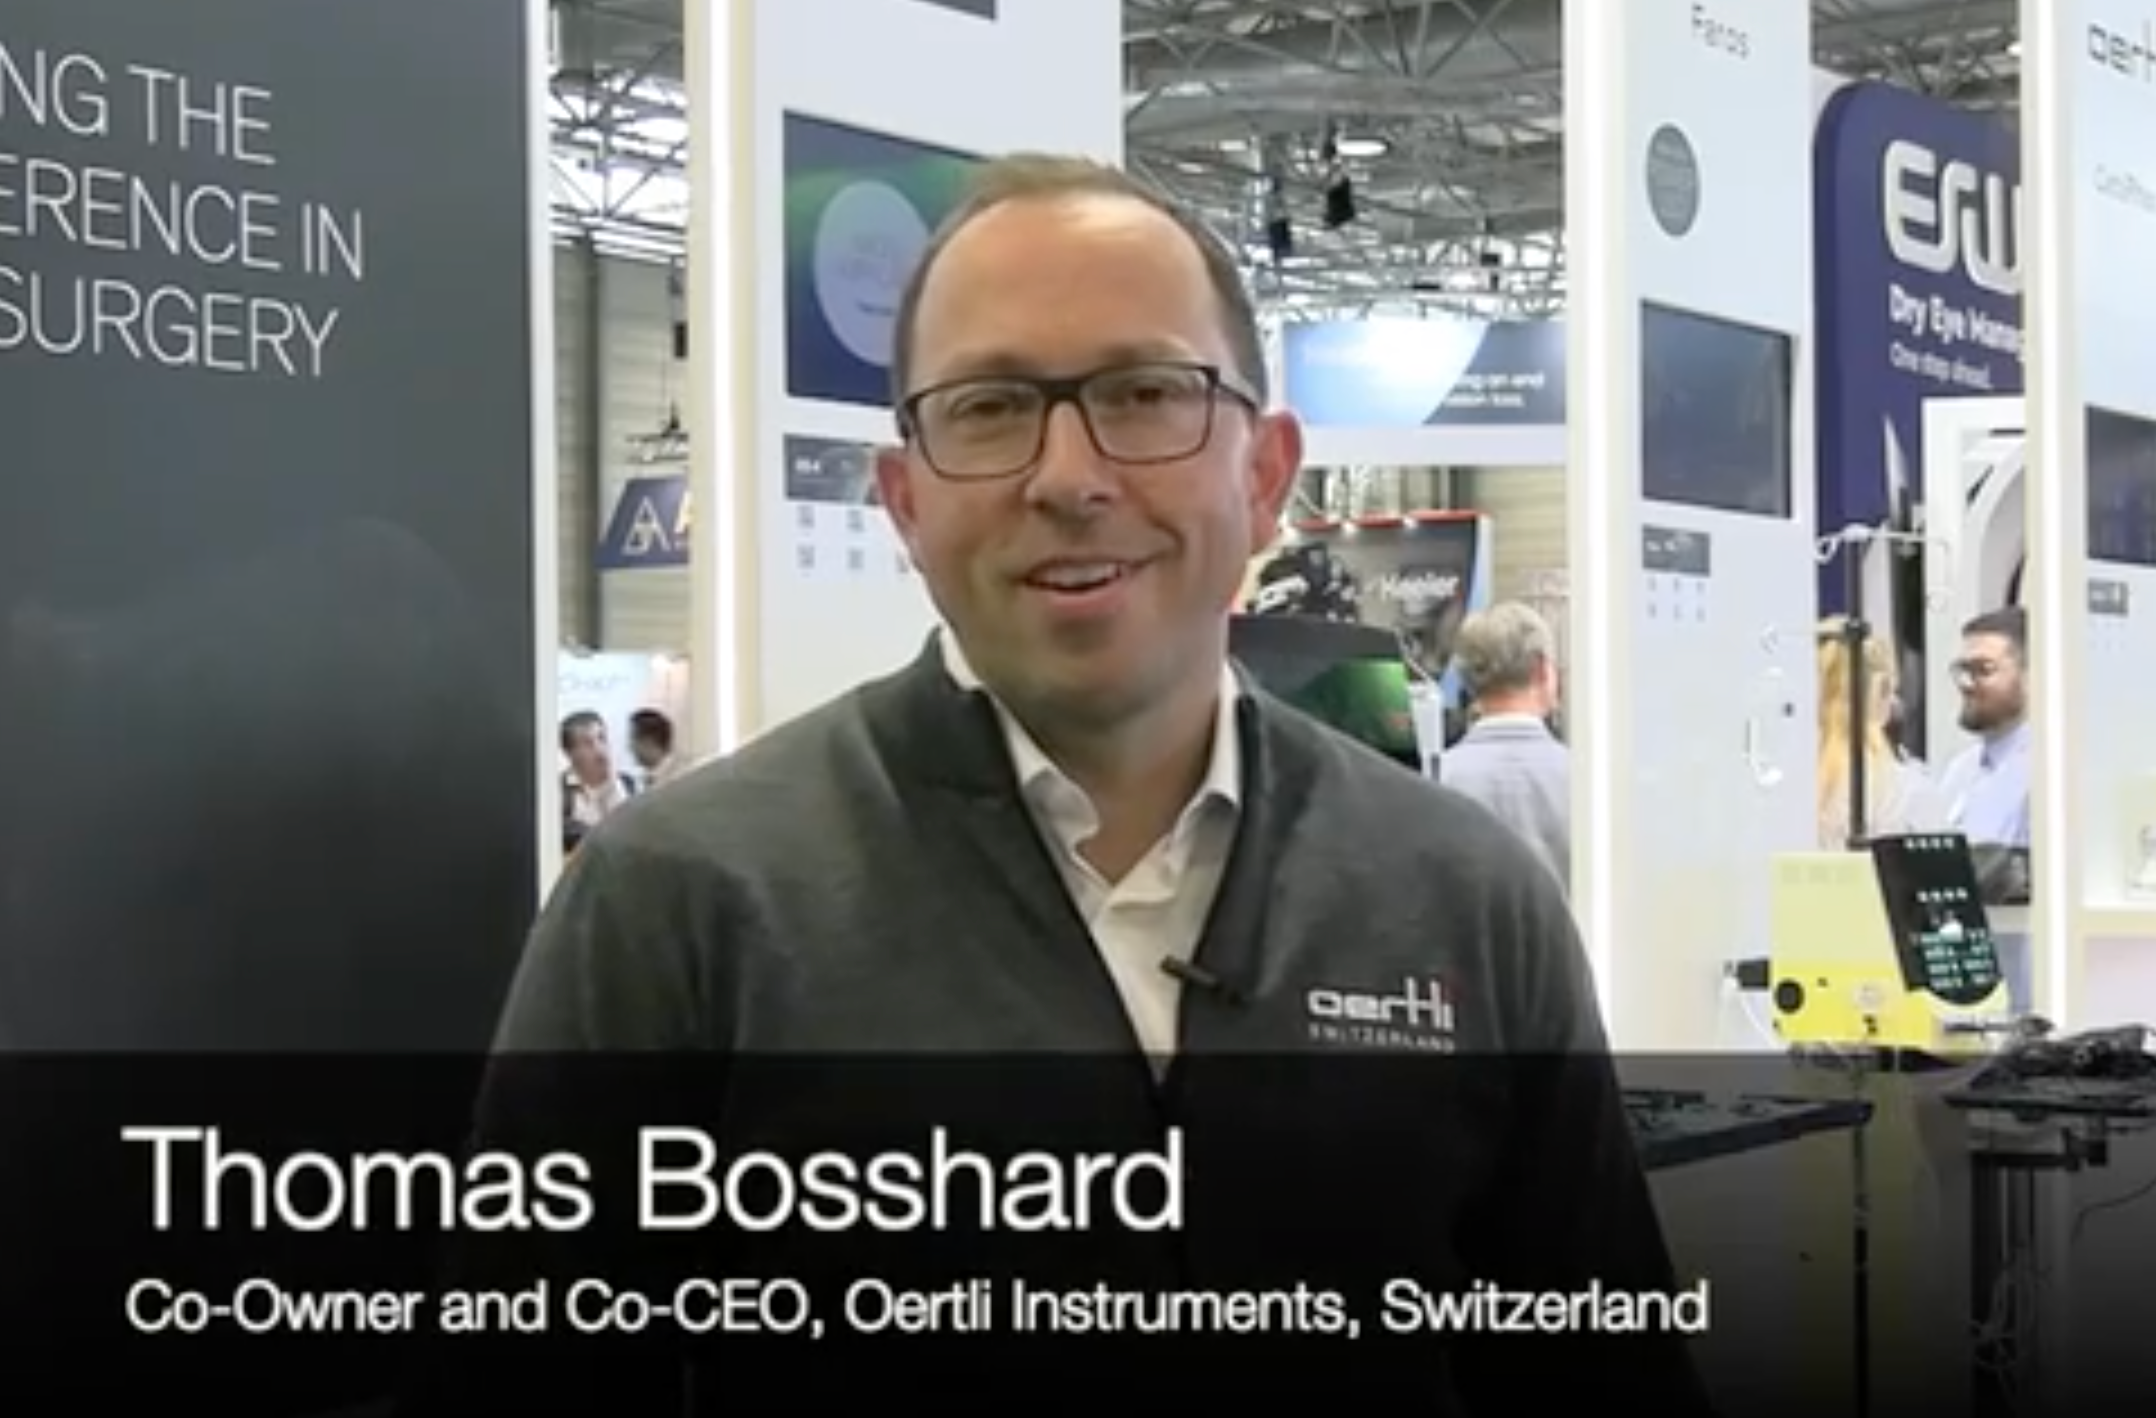 Thomas Bosshard stands at the Oertli Instruments booth at the ESCRS meeting